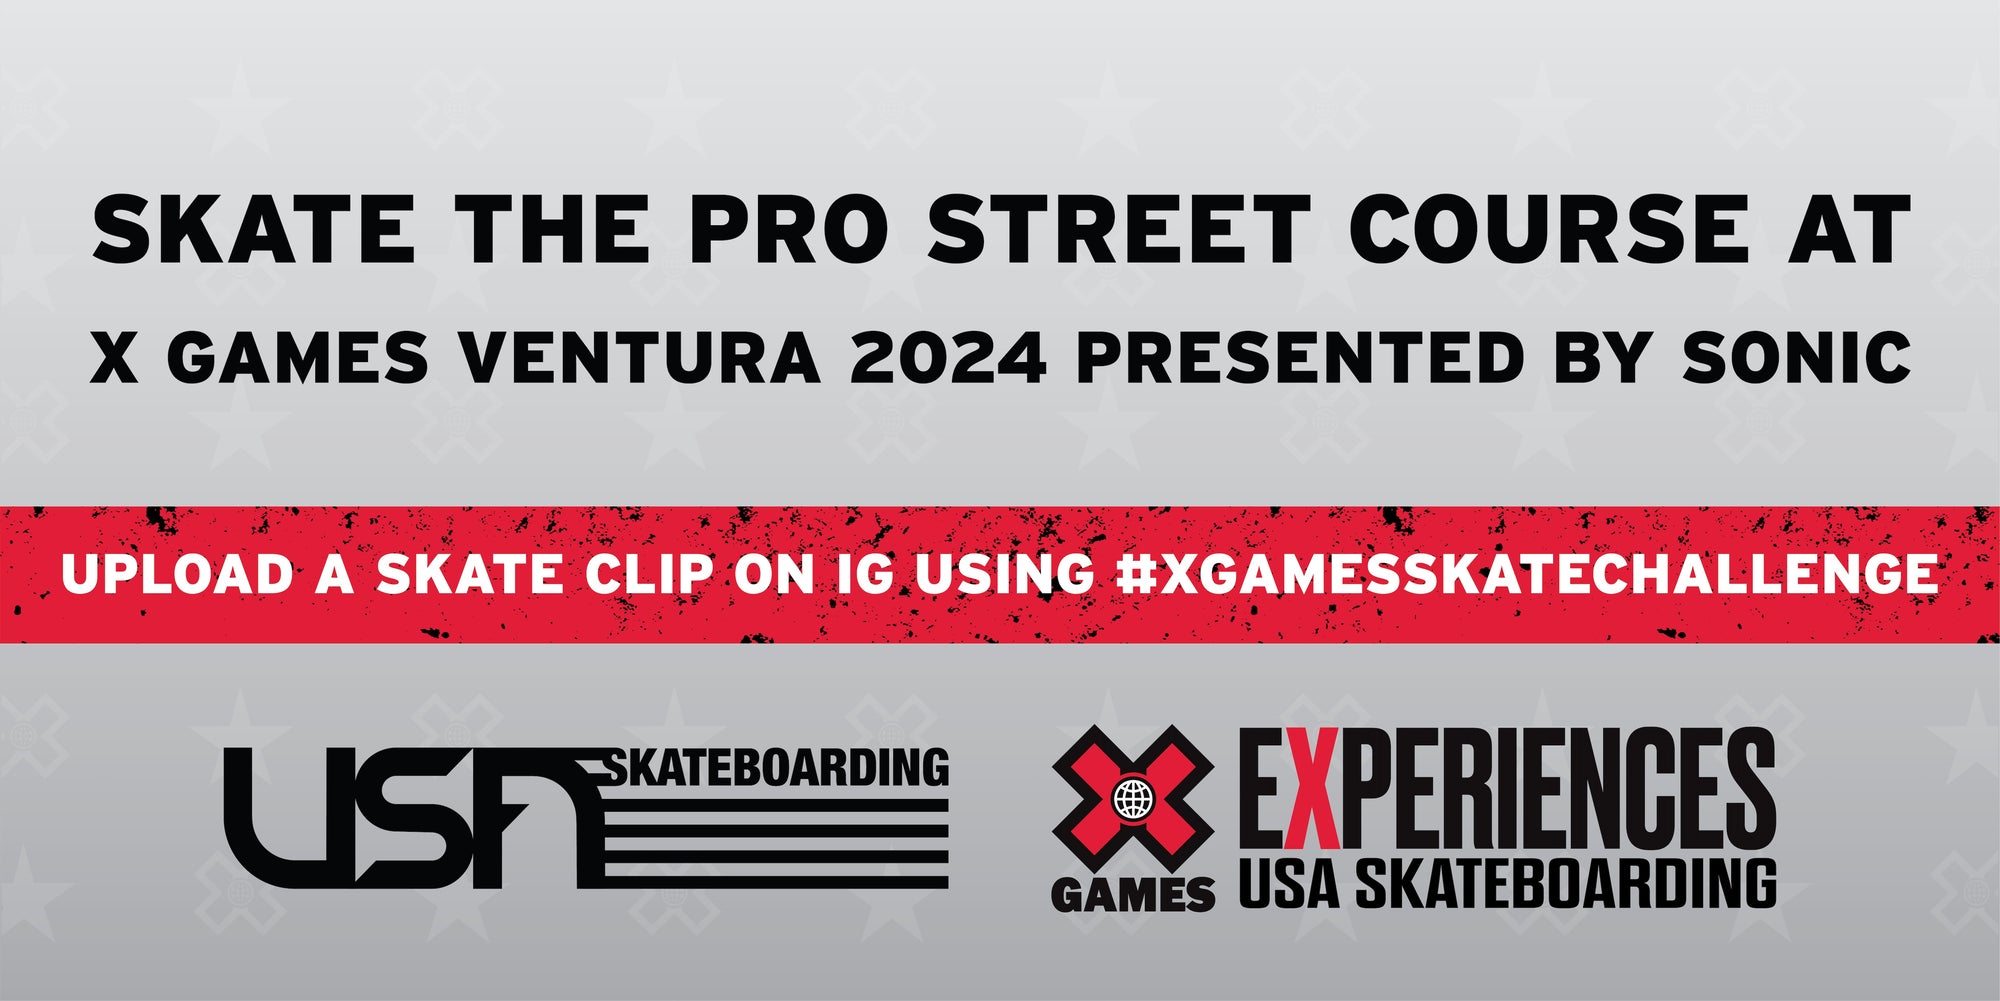 Skate the PRO Street Course at X Games Ventura 2024 presented by SONIC | #XGamesSkateChallenge